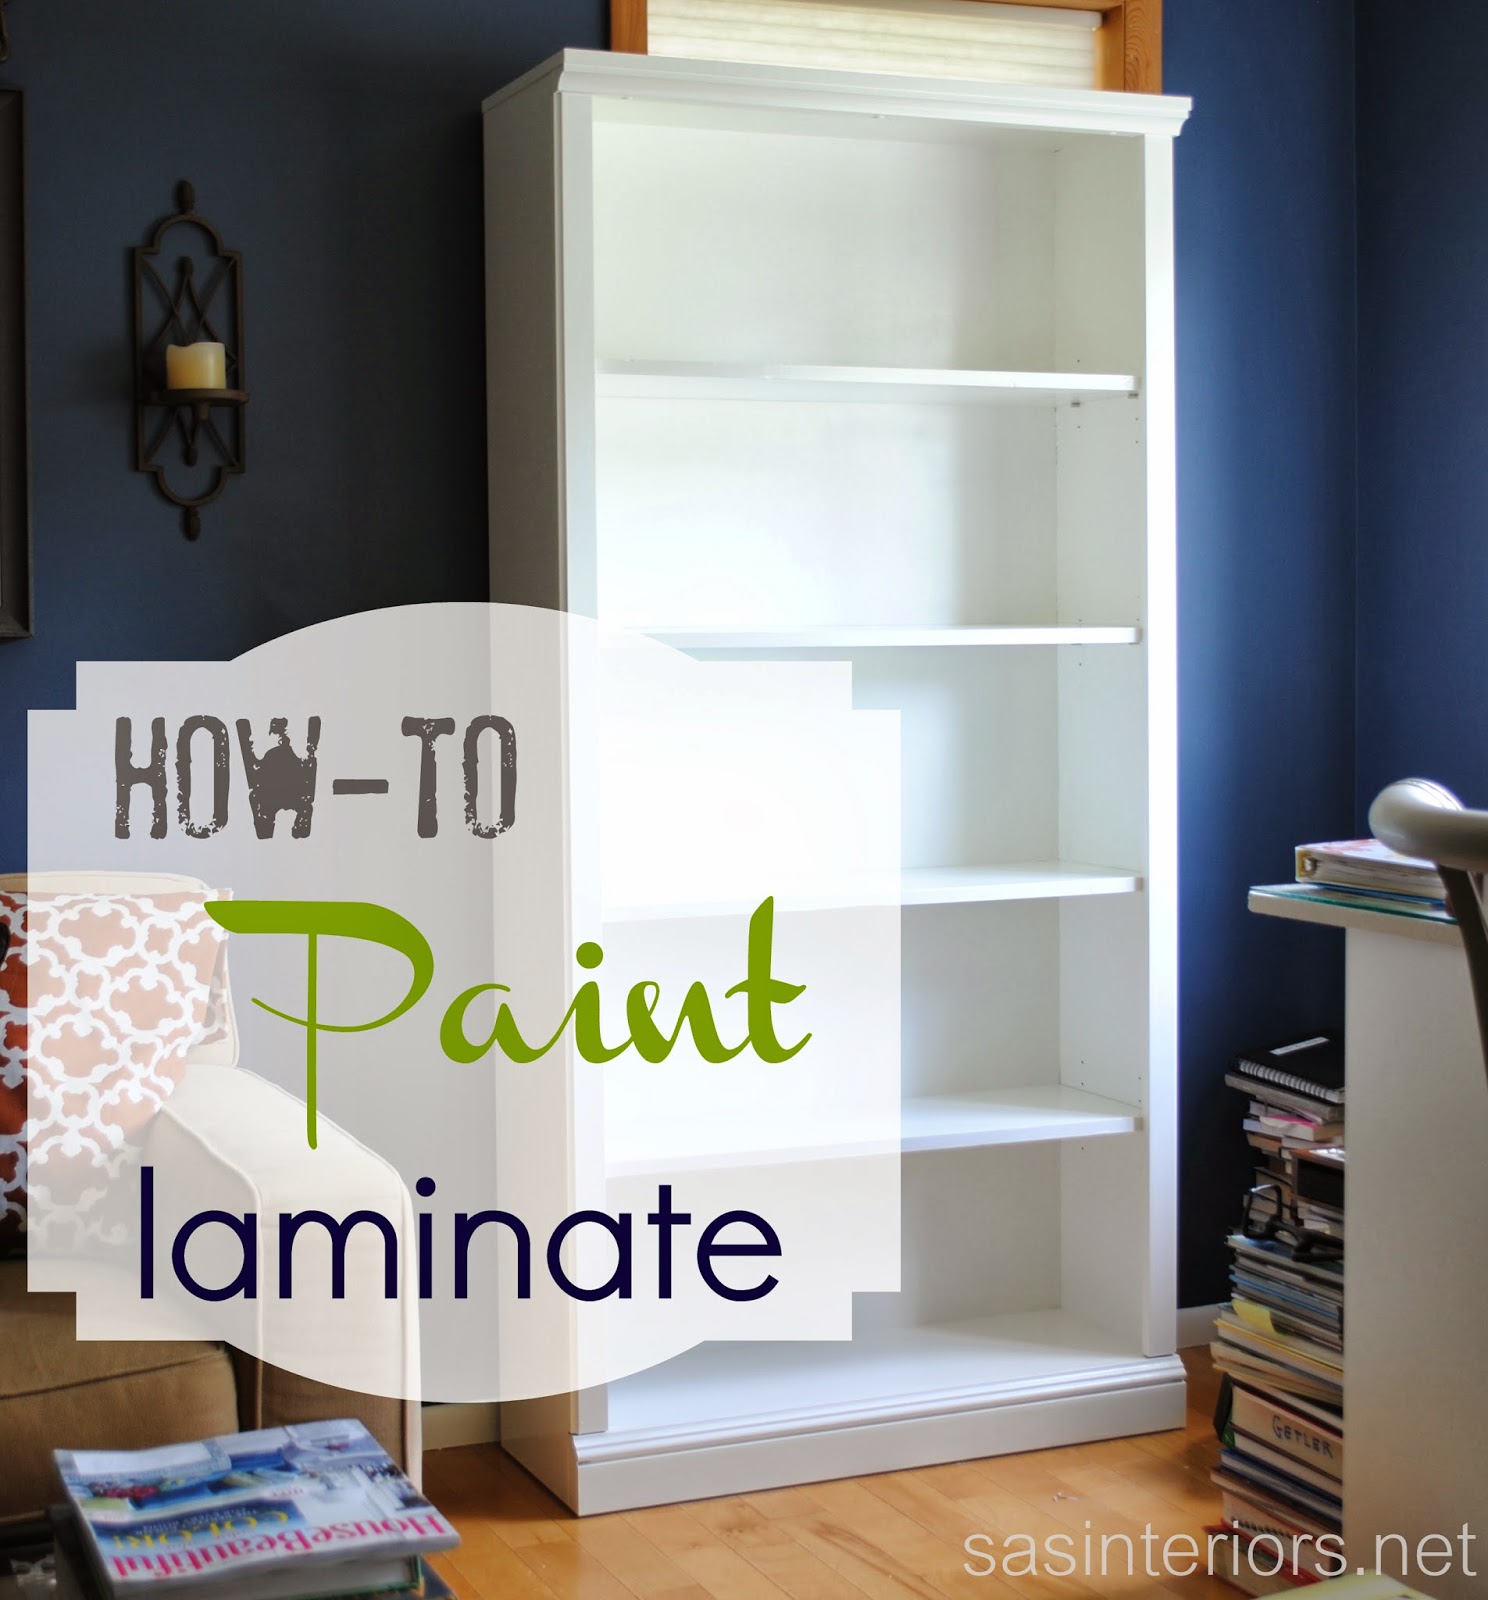 Diy Projects: DIY How-To Paint Laminate Furniture